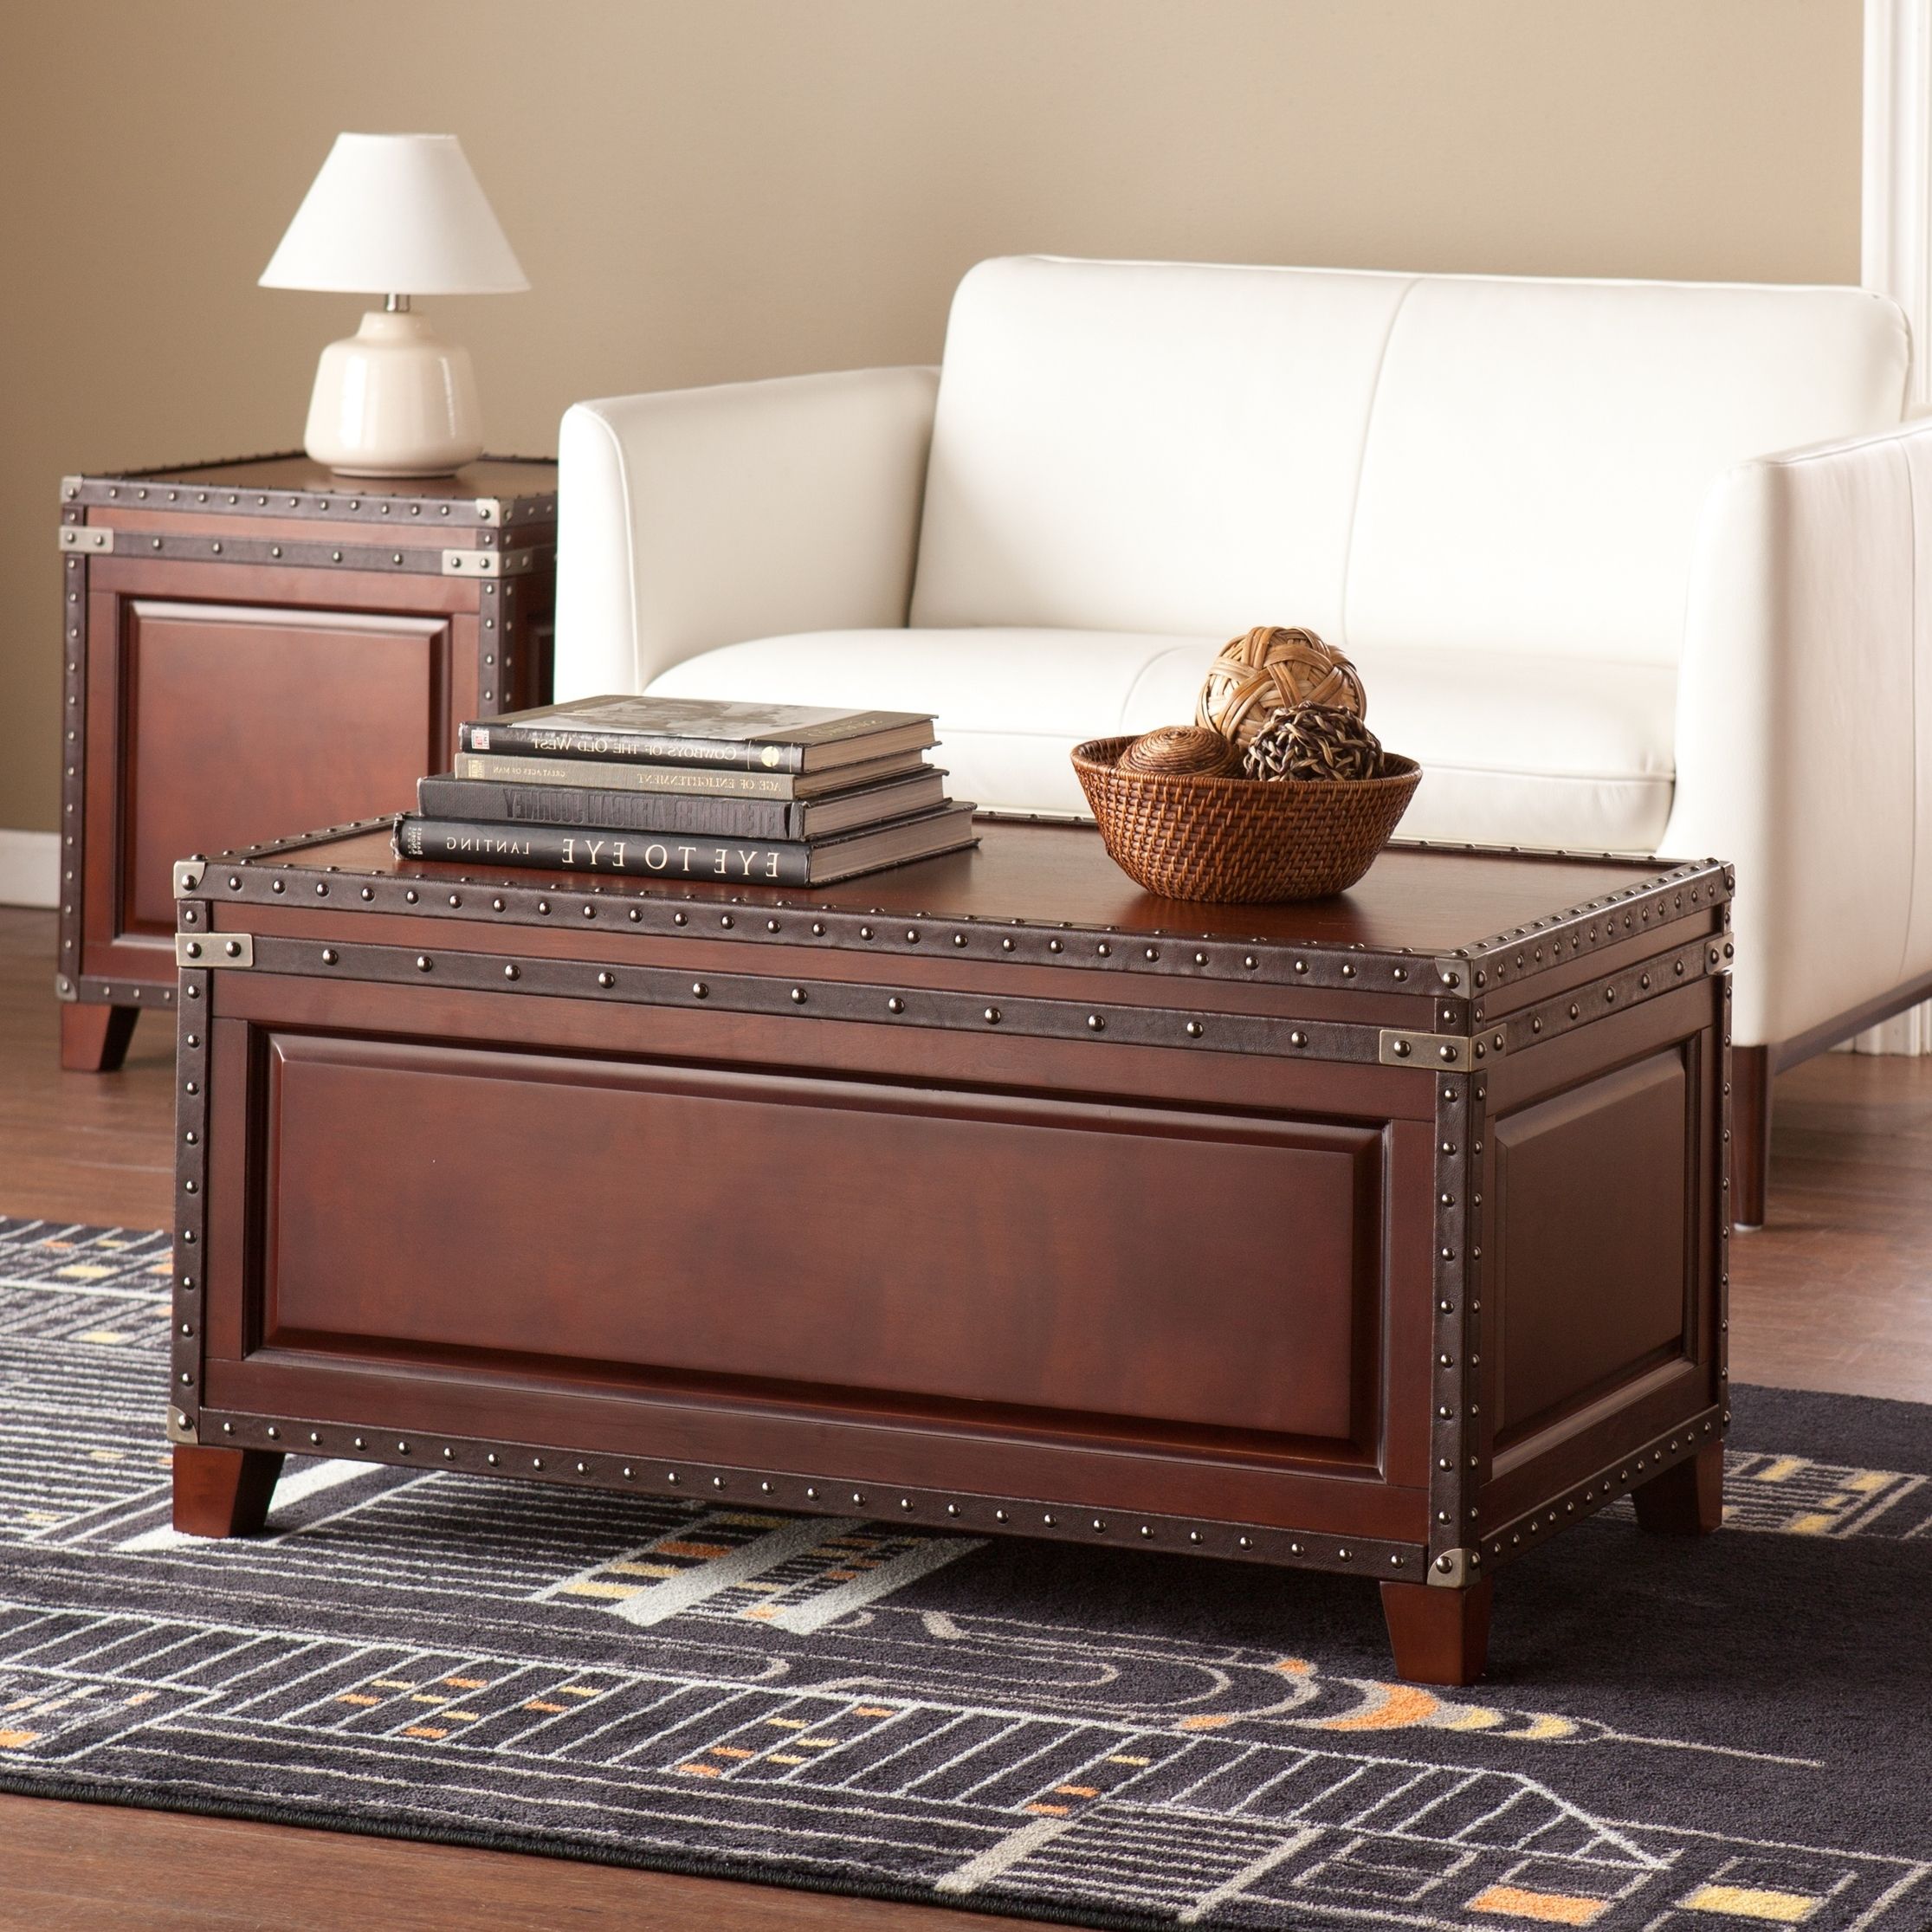 Espresso Wood Storage Console Tables With 2020 Coffee Table With Storage Trunk Chest Hidden Bin Leather (View 6 of 10)